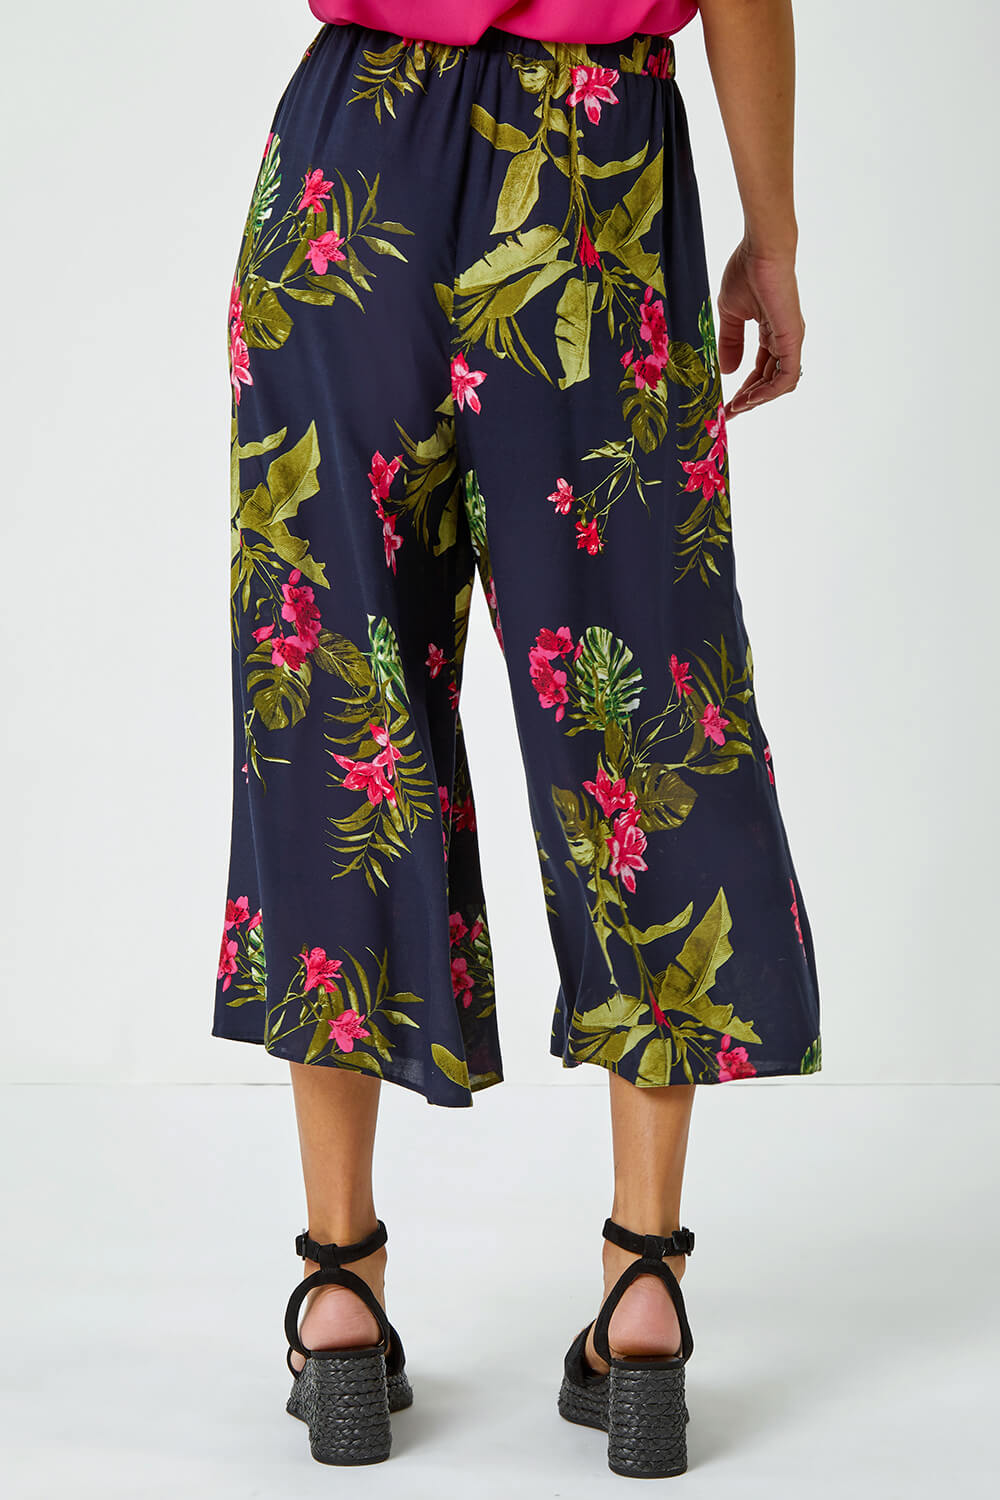 PINK Floral Palm Print Culottes, Image 4 of 5